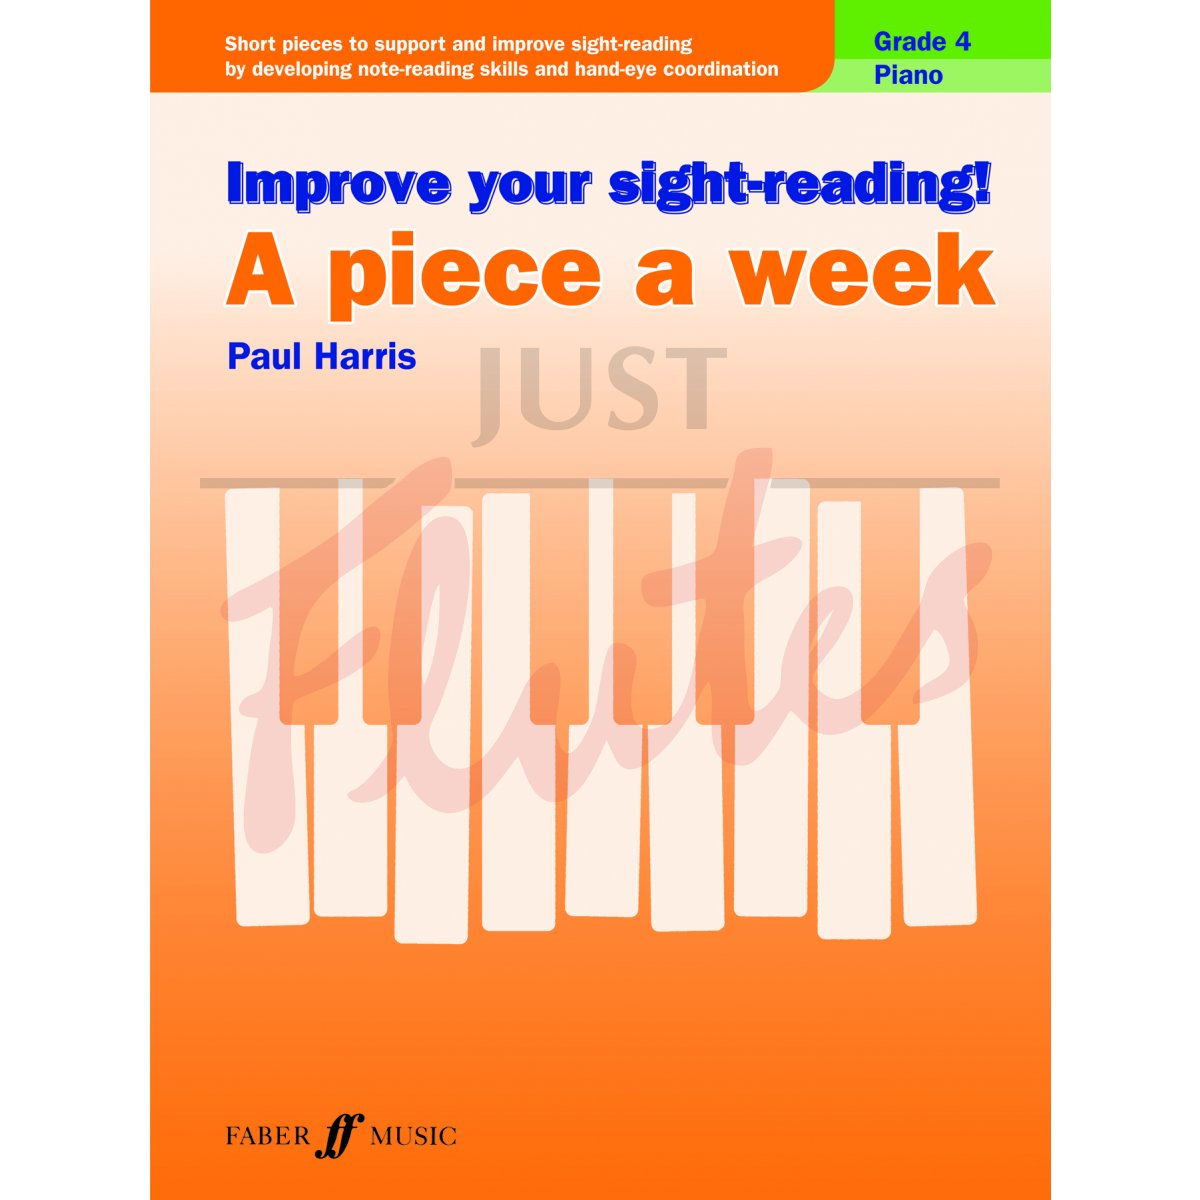 Improve Your Sight-Reading! A Piece a Week Piano Grade 4